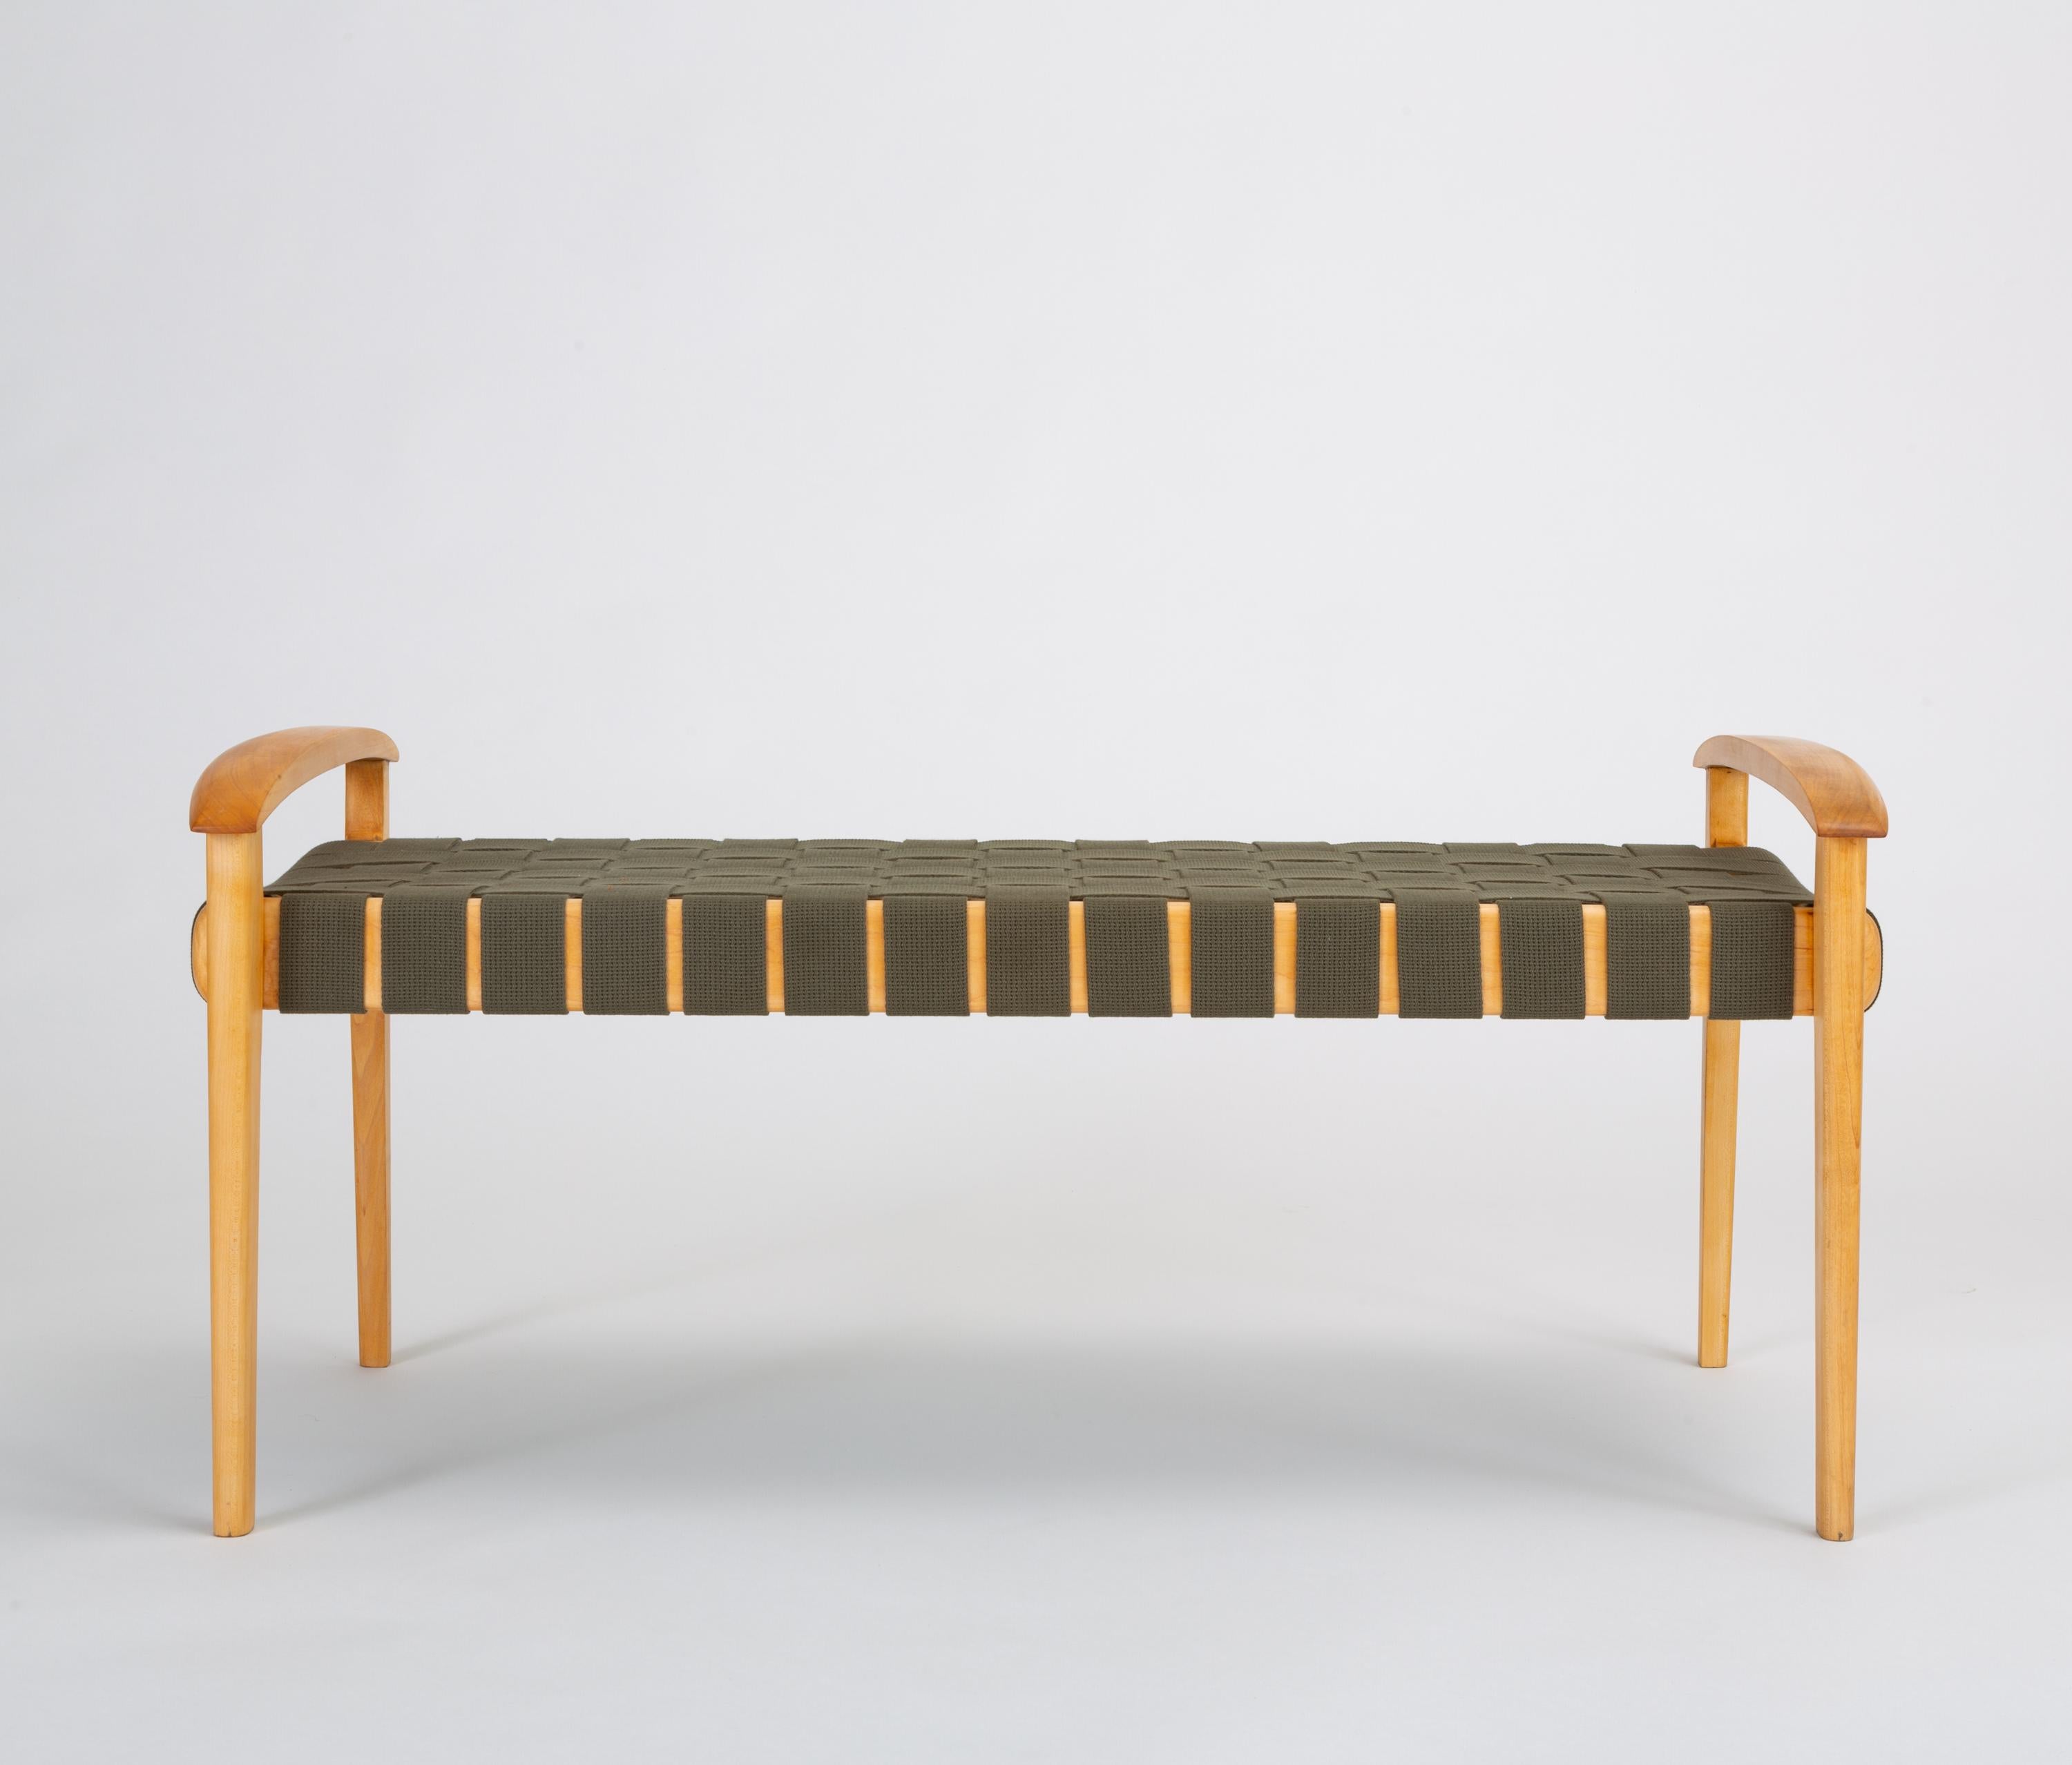 An elegantly crafted bench by Portland, OR-based furniture designer and fabricator. Ghilarducci is a contemporary designer, though this is an older design dating, according to a handwritten notation beneath the bench seat, to 2001. The Scandinavian